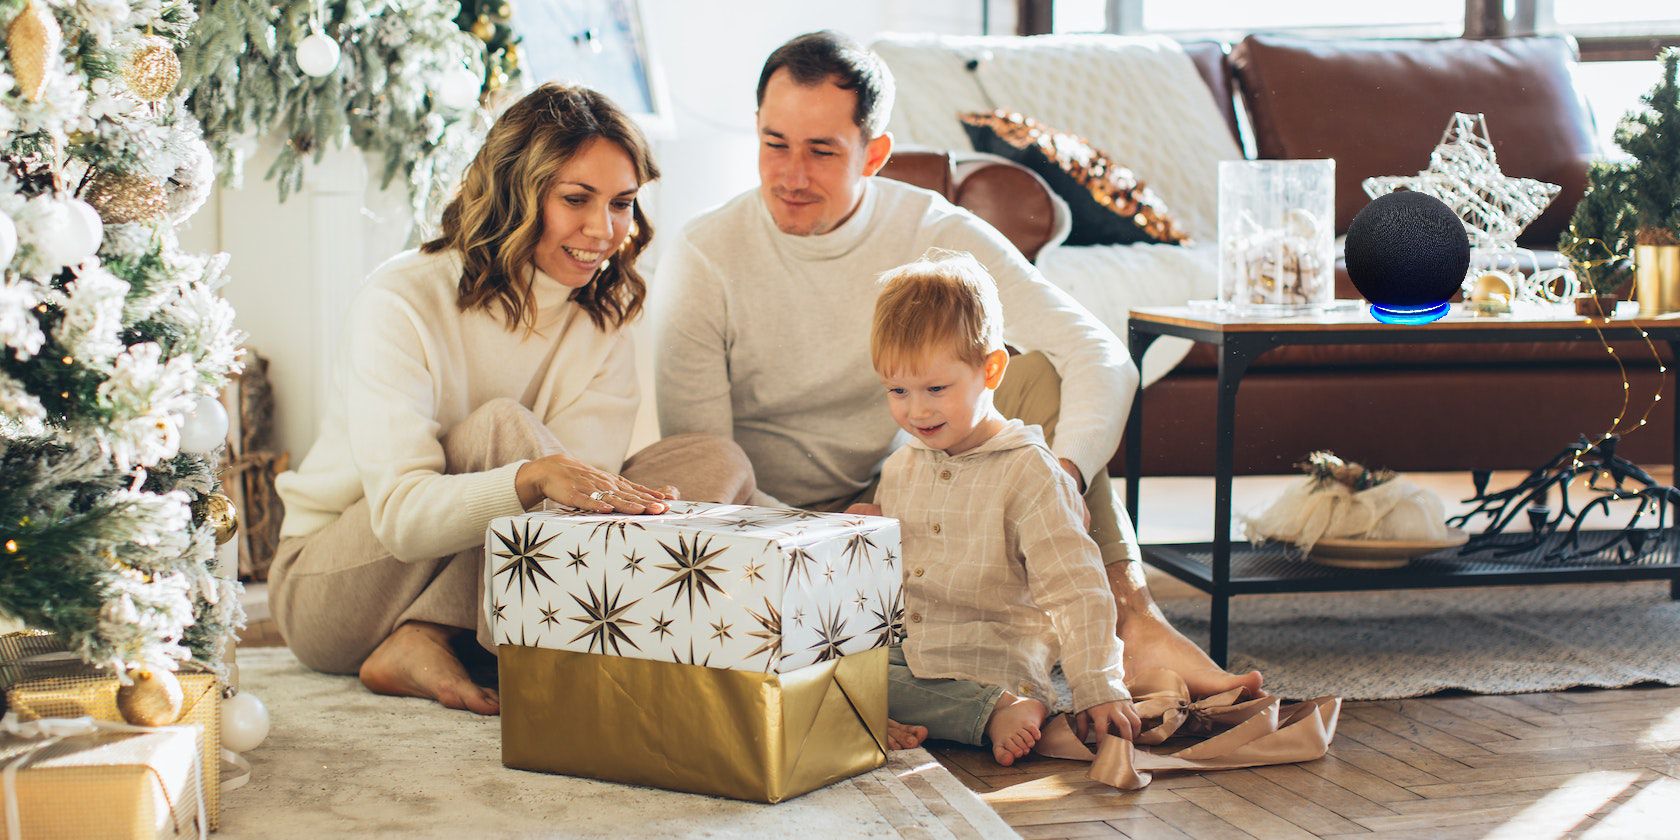 A Family Next to a Christmas Tree with Amazon Echo on Table